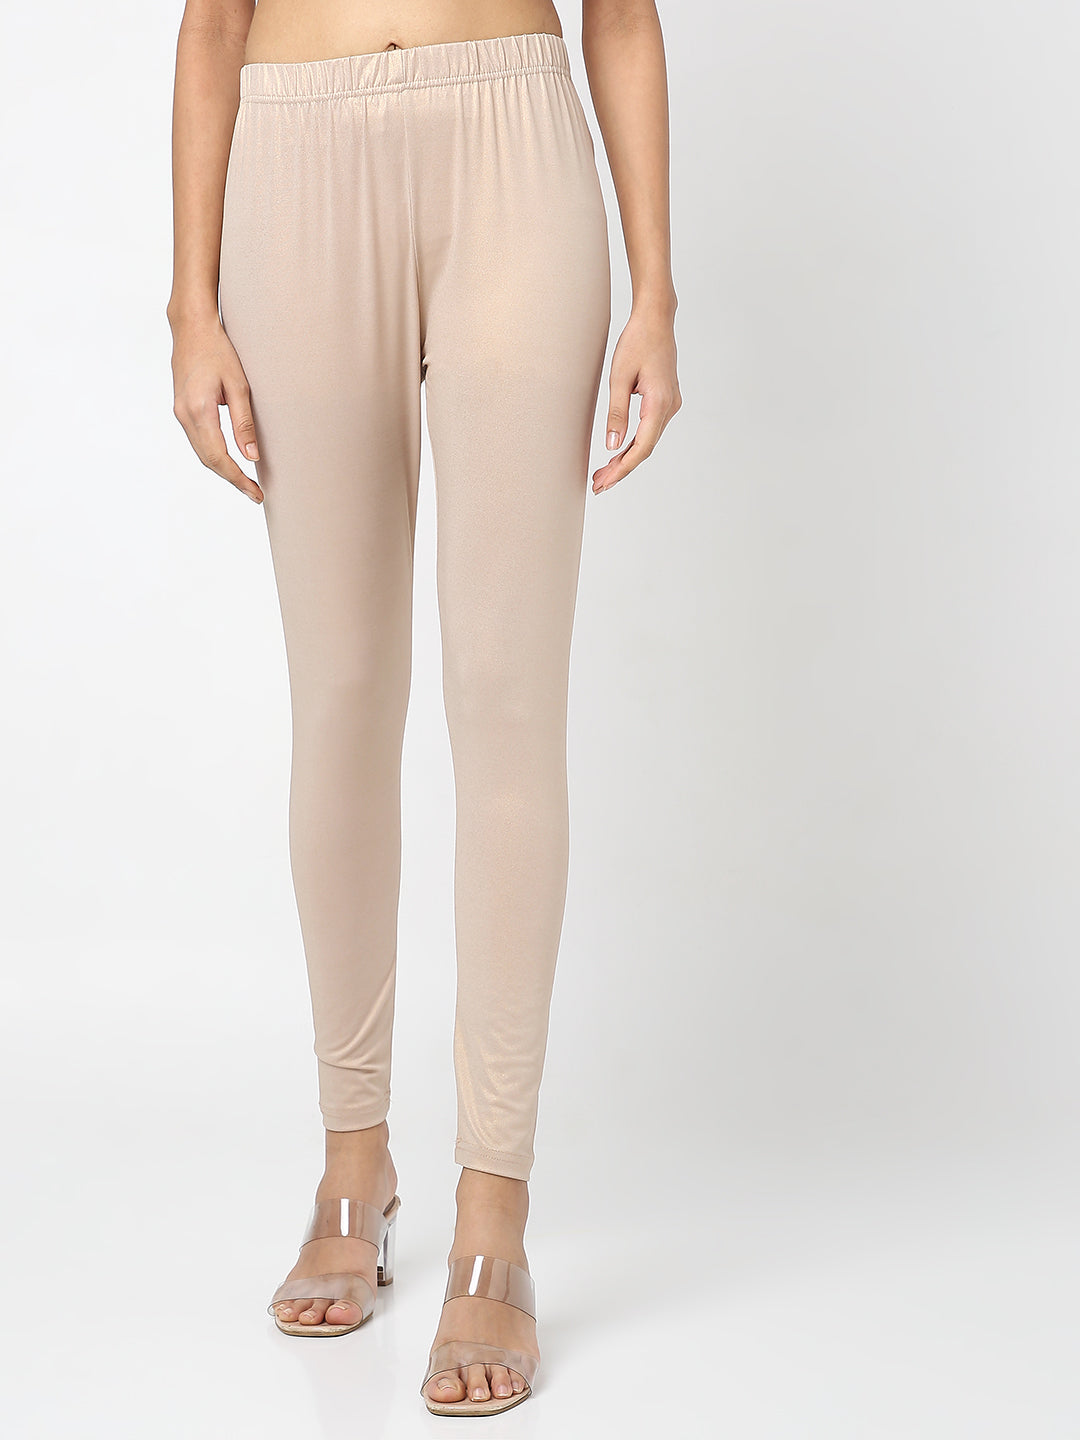 Pull On Polyester Spandex Pants  Neiman Marcus